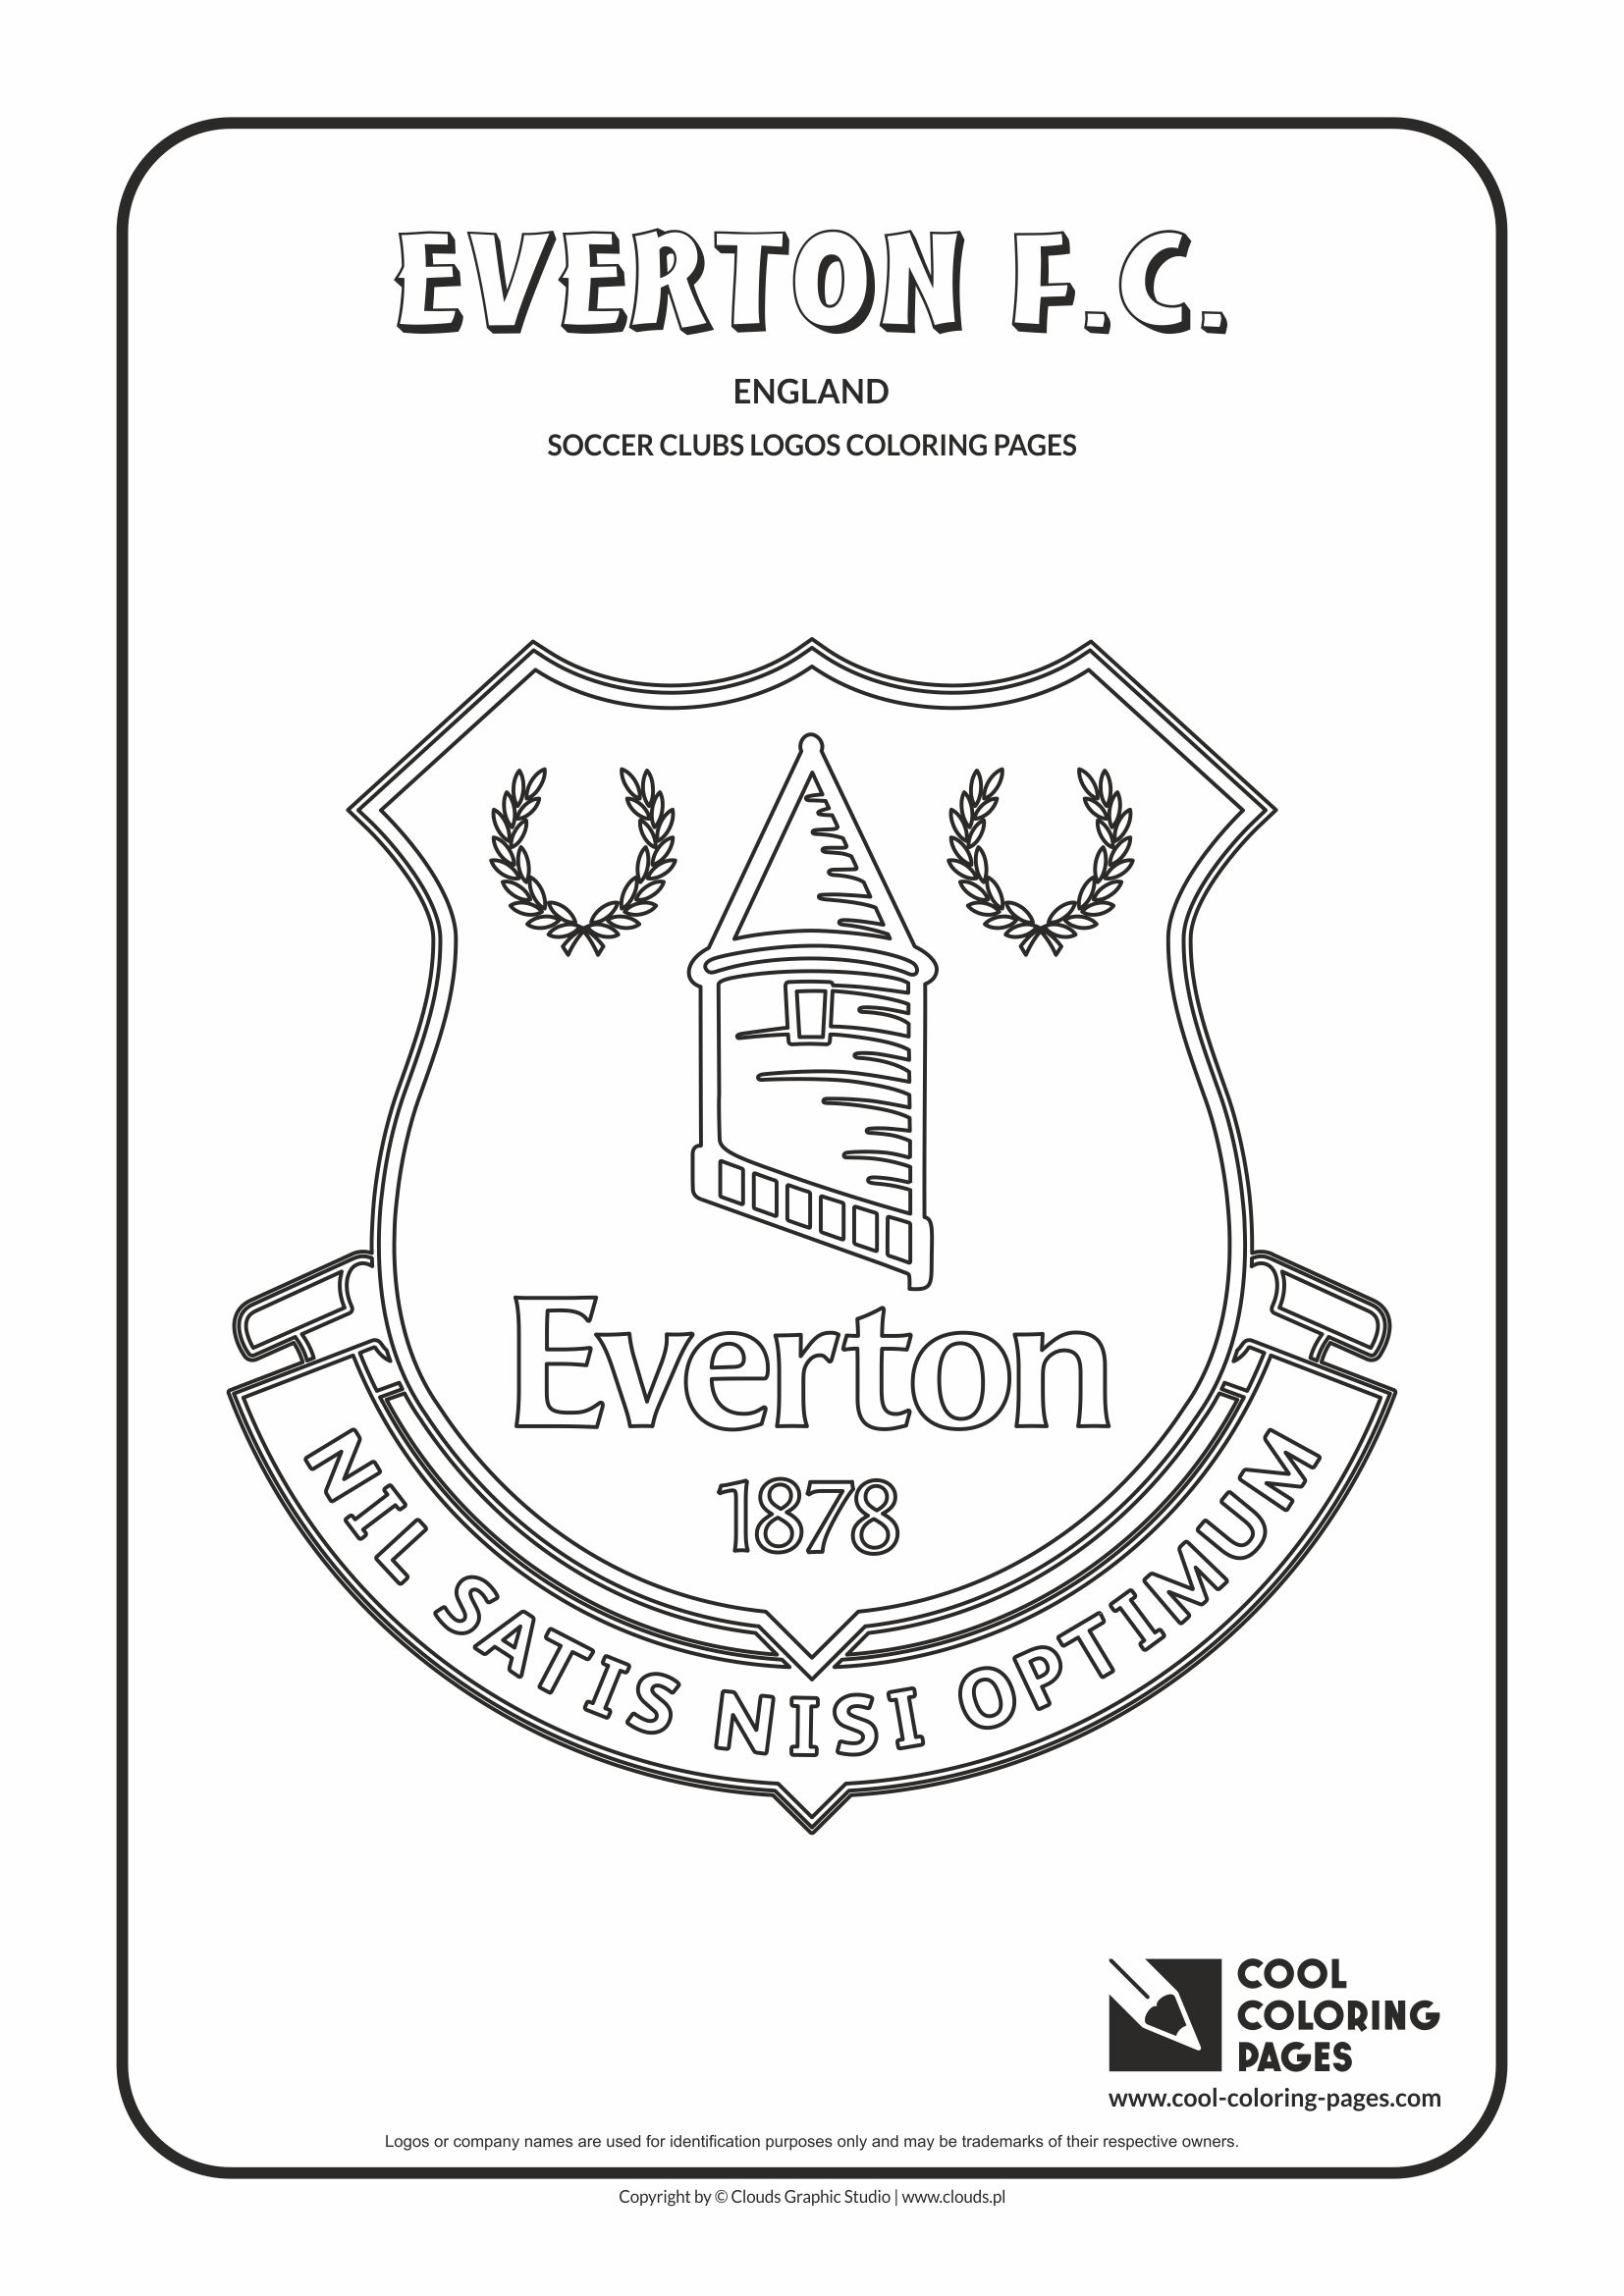 Everton F.C. logo coloring / Coloring page with Everton F.C. logo / Everton F.C. logo colouring page.